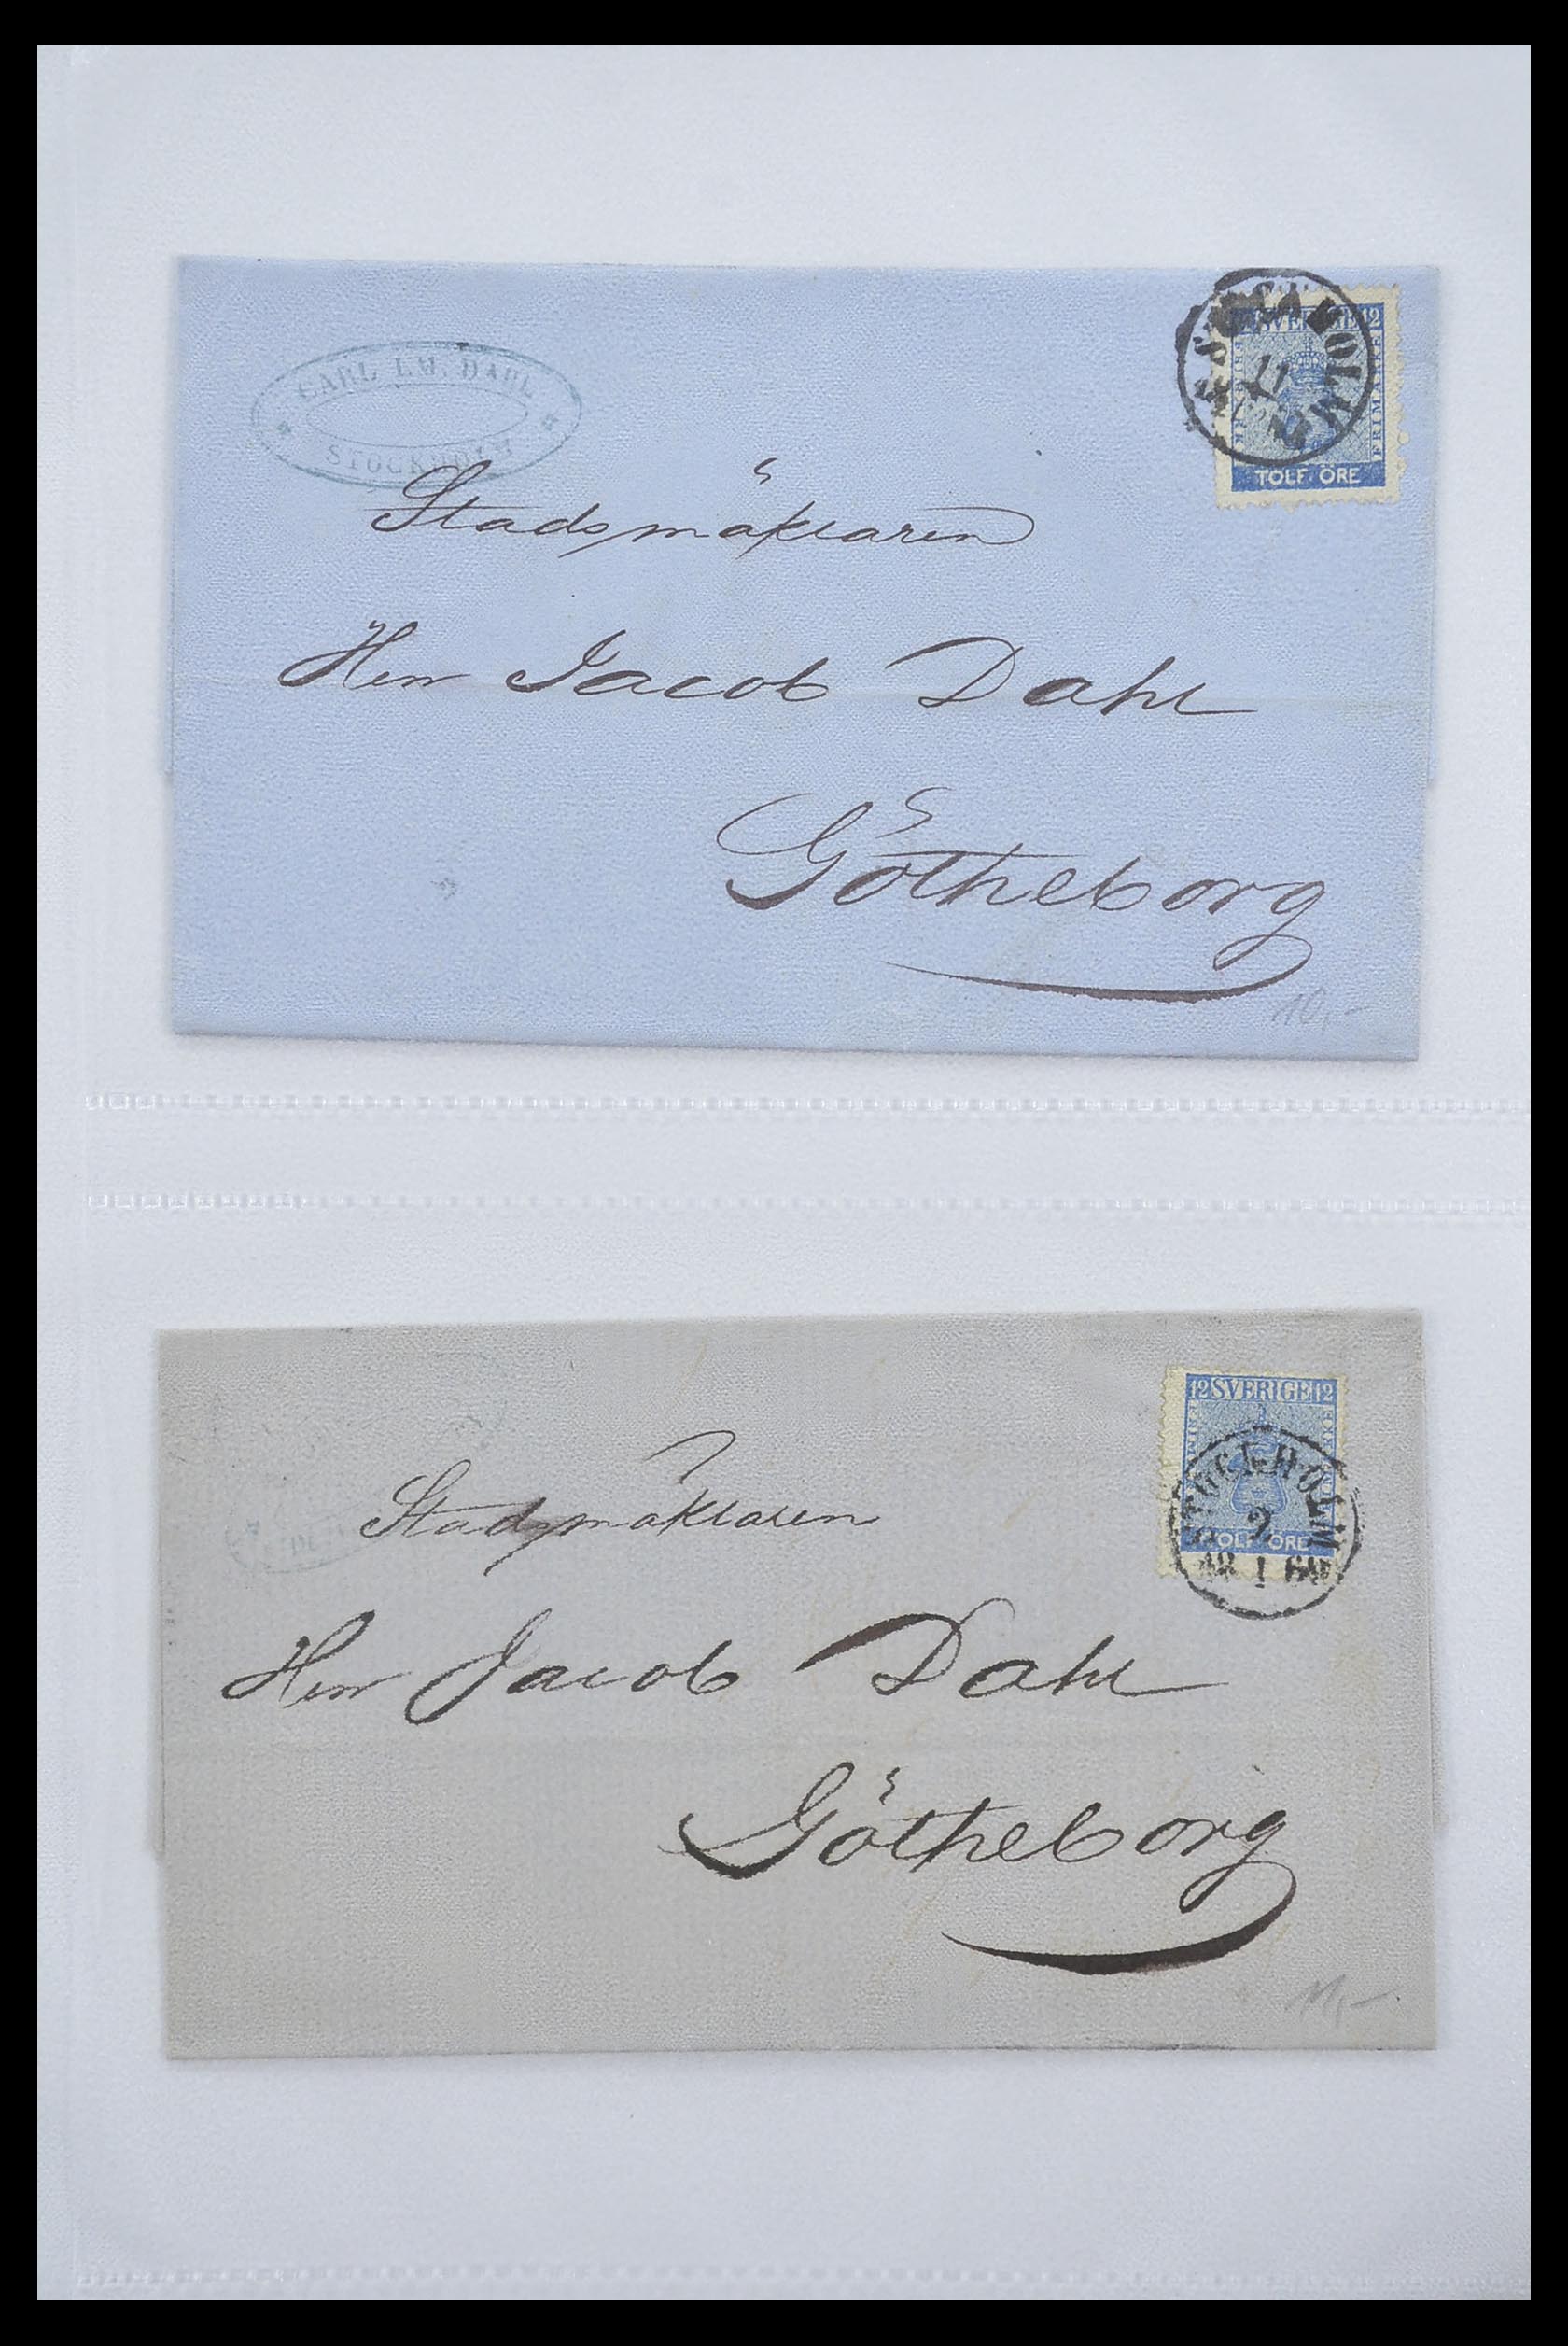 33241 015 - Stamp collection 33241 Scandinavia covers 1860-1930.